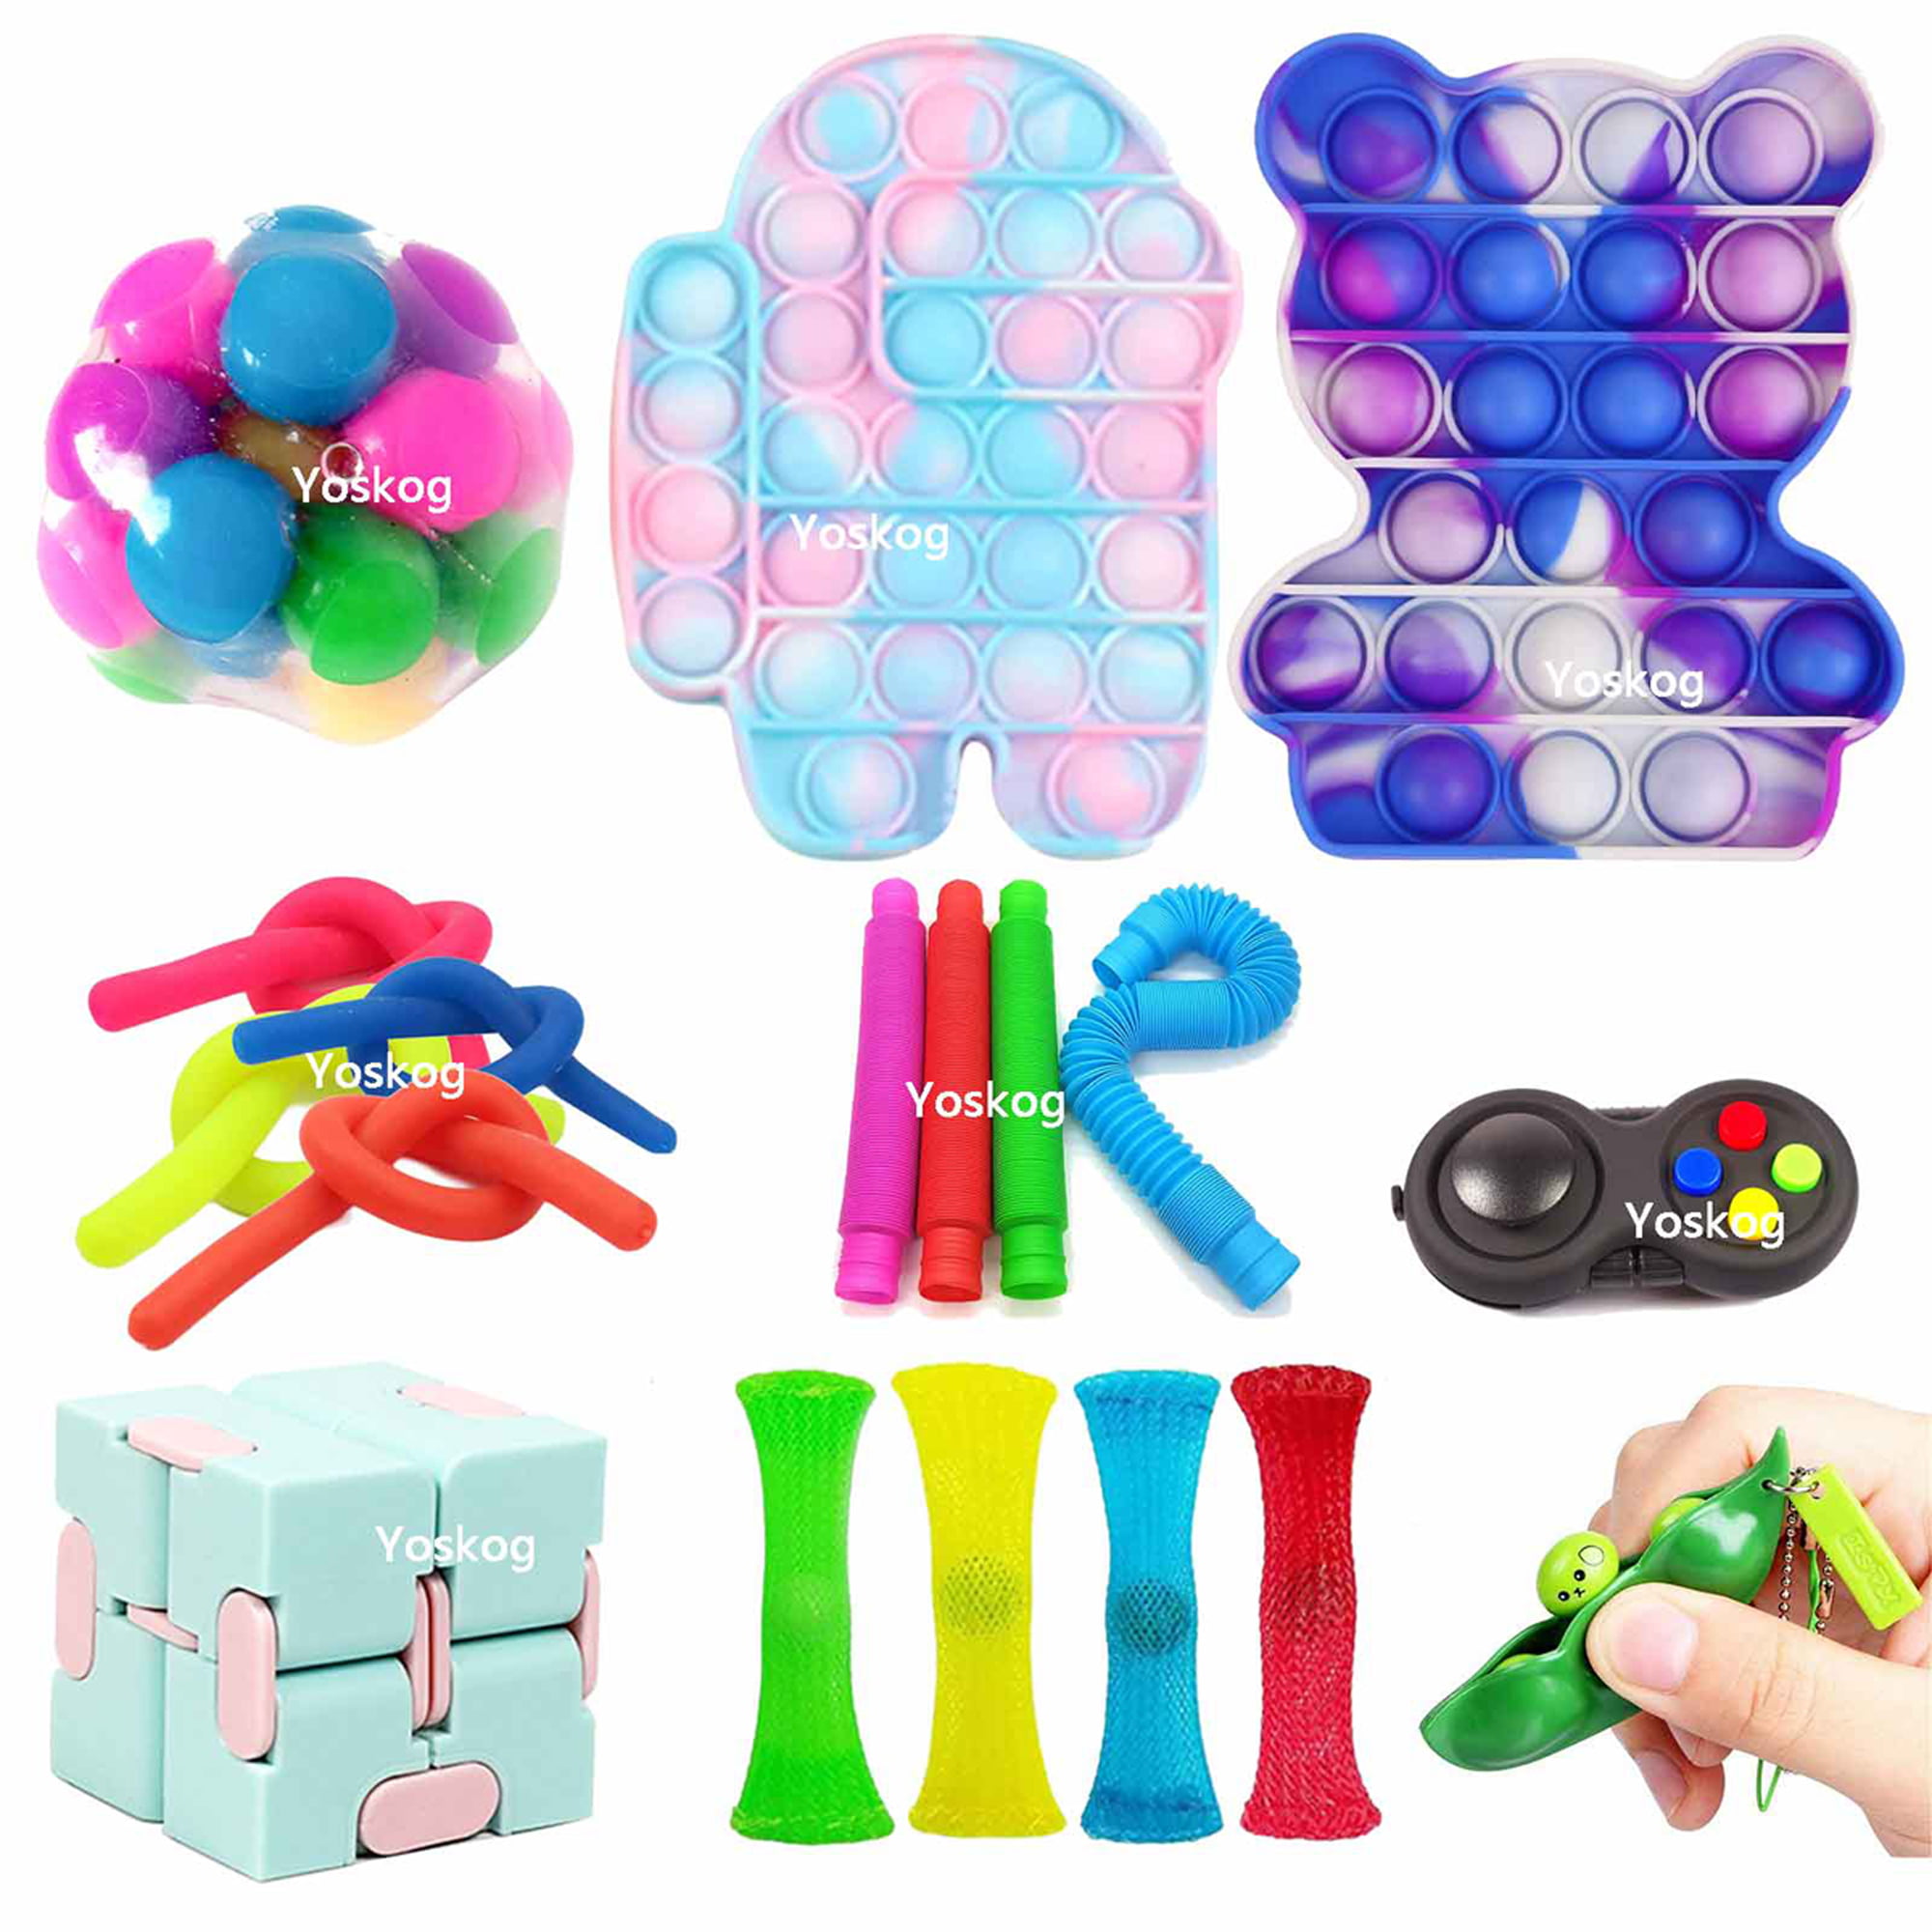 Sensory Big Size New Toys Pack Fidget Toy Set Fidget Toy Packs Simple Dimples Fidget Popper Toys Anti-Anxiety Autistic ADHD Toy Set Press Type Early Learning Stress Relief Toys for Kids Adults 